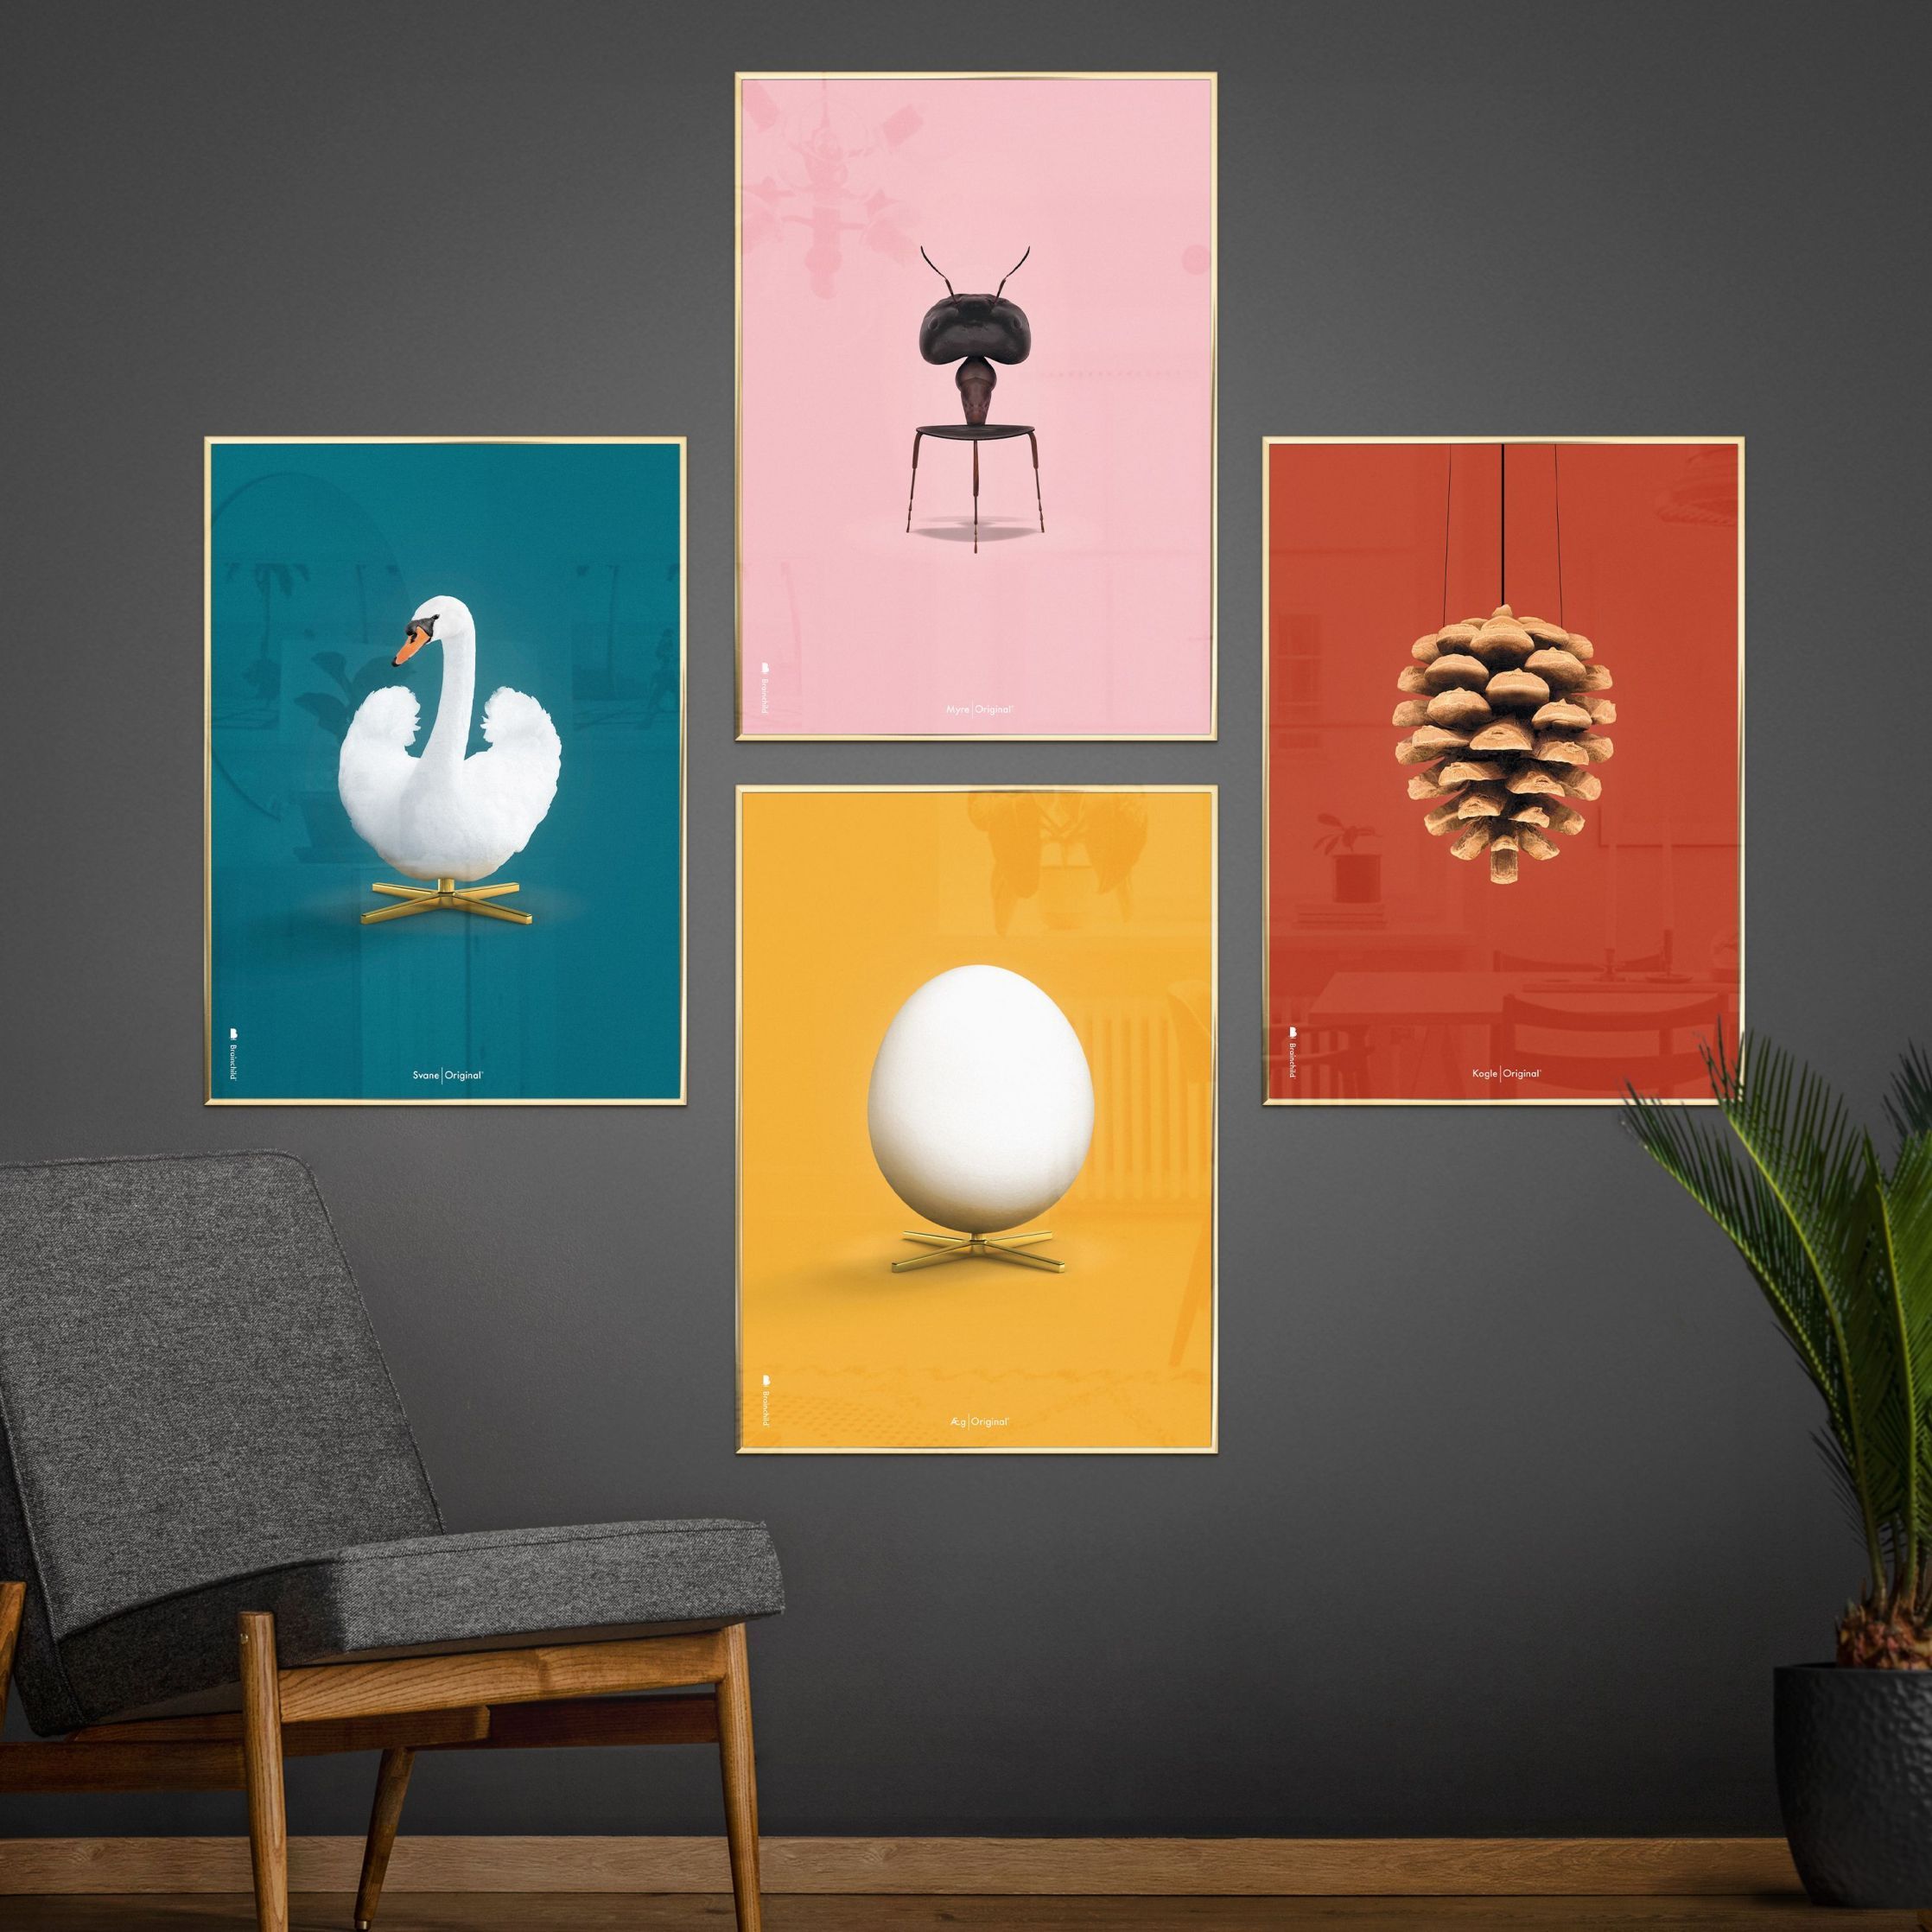 Brainchild Egg Classic Poster, Frame Made Of Light Wood A5, Yellow Background